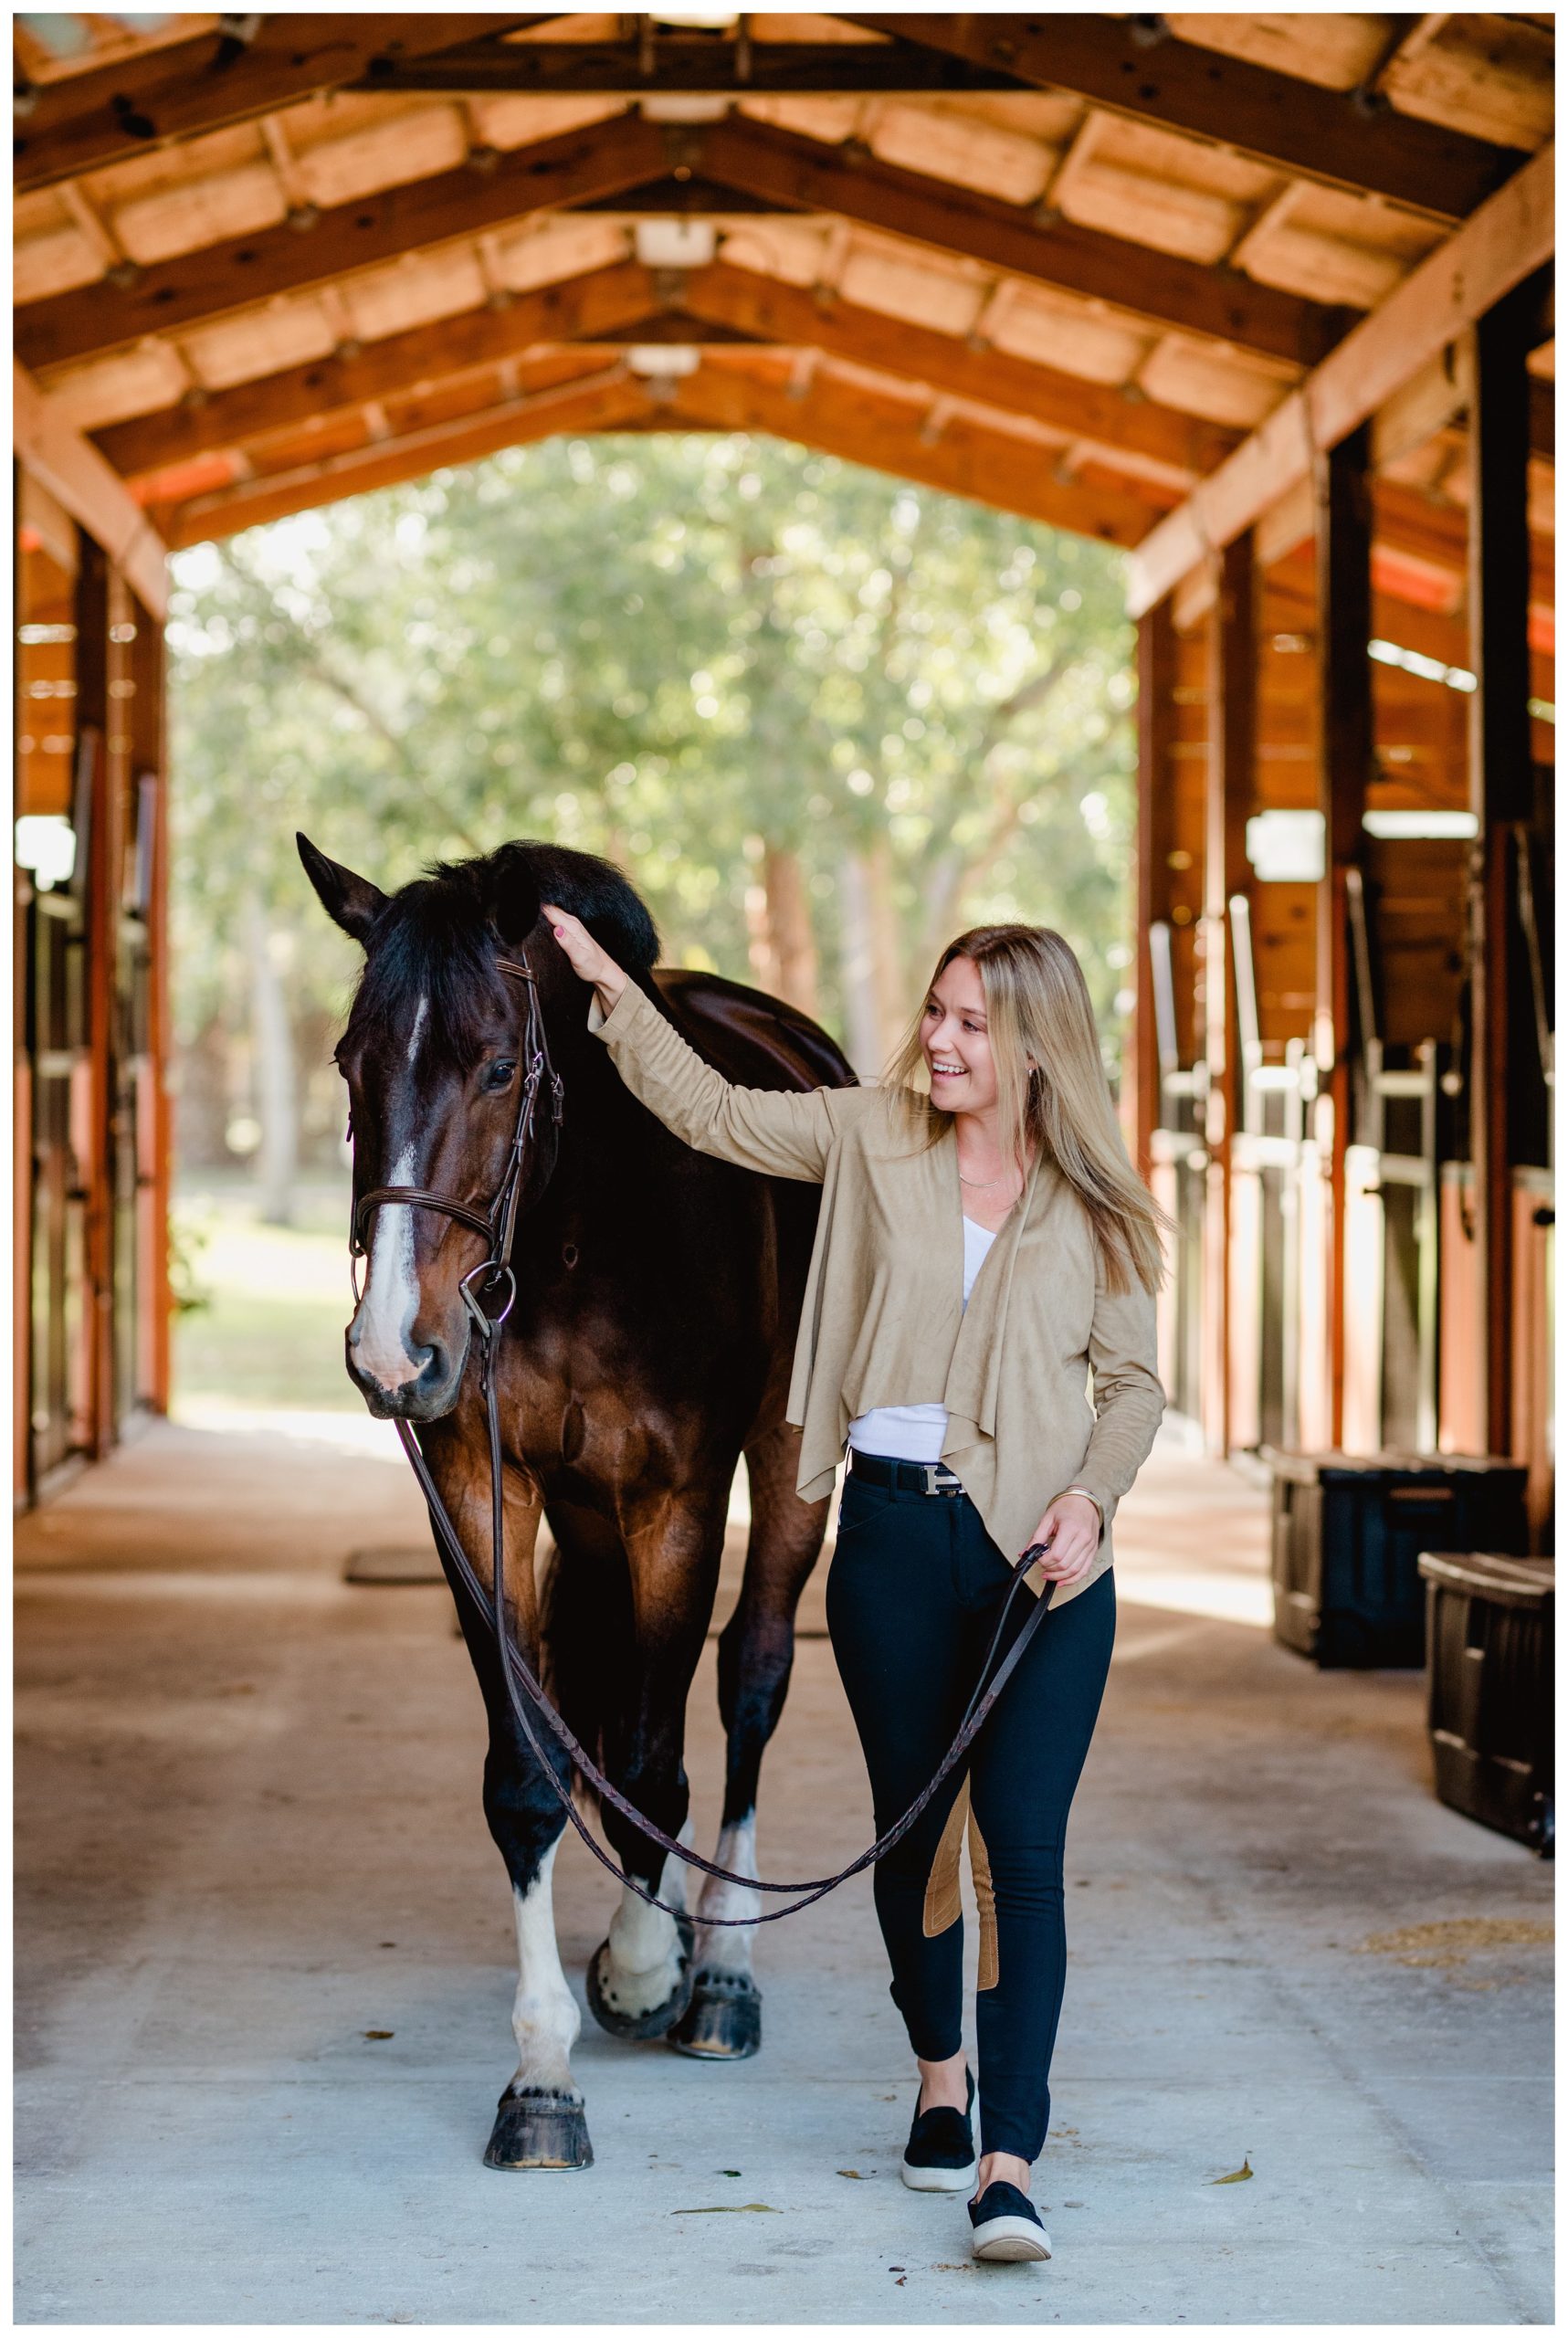 Equestrian photographer in Florida takes photos of horse and owner walking down barn aisle.